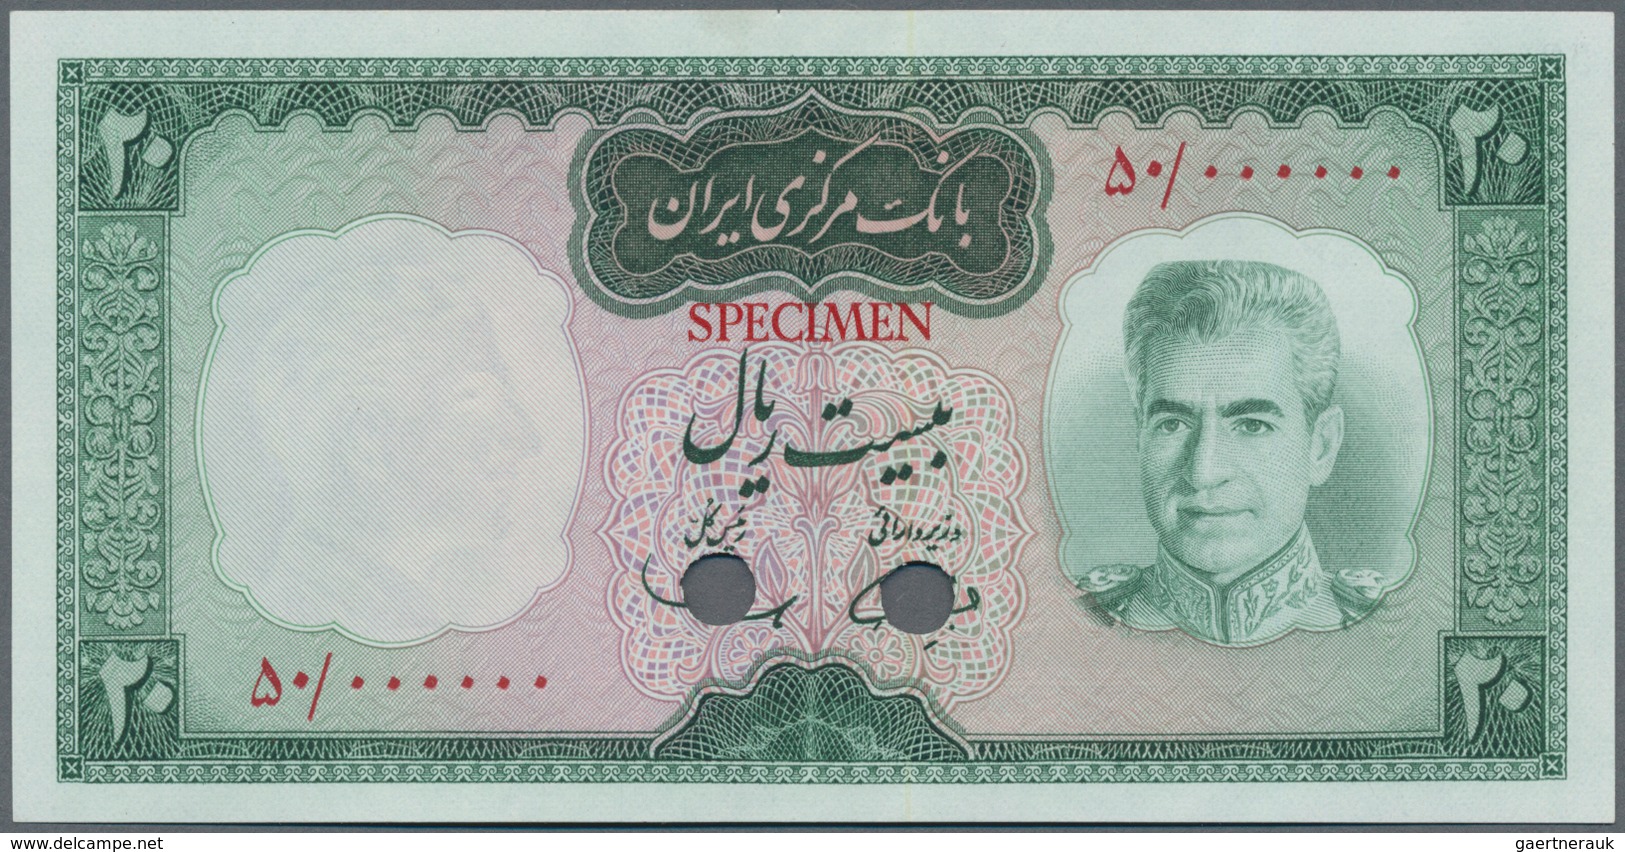 Iran: 20 Rials ND(1970) Specimen P. 85s With Zero Serial Numbers, Red Specimen Overprint And Cancell - Iran